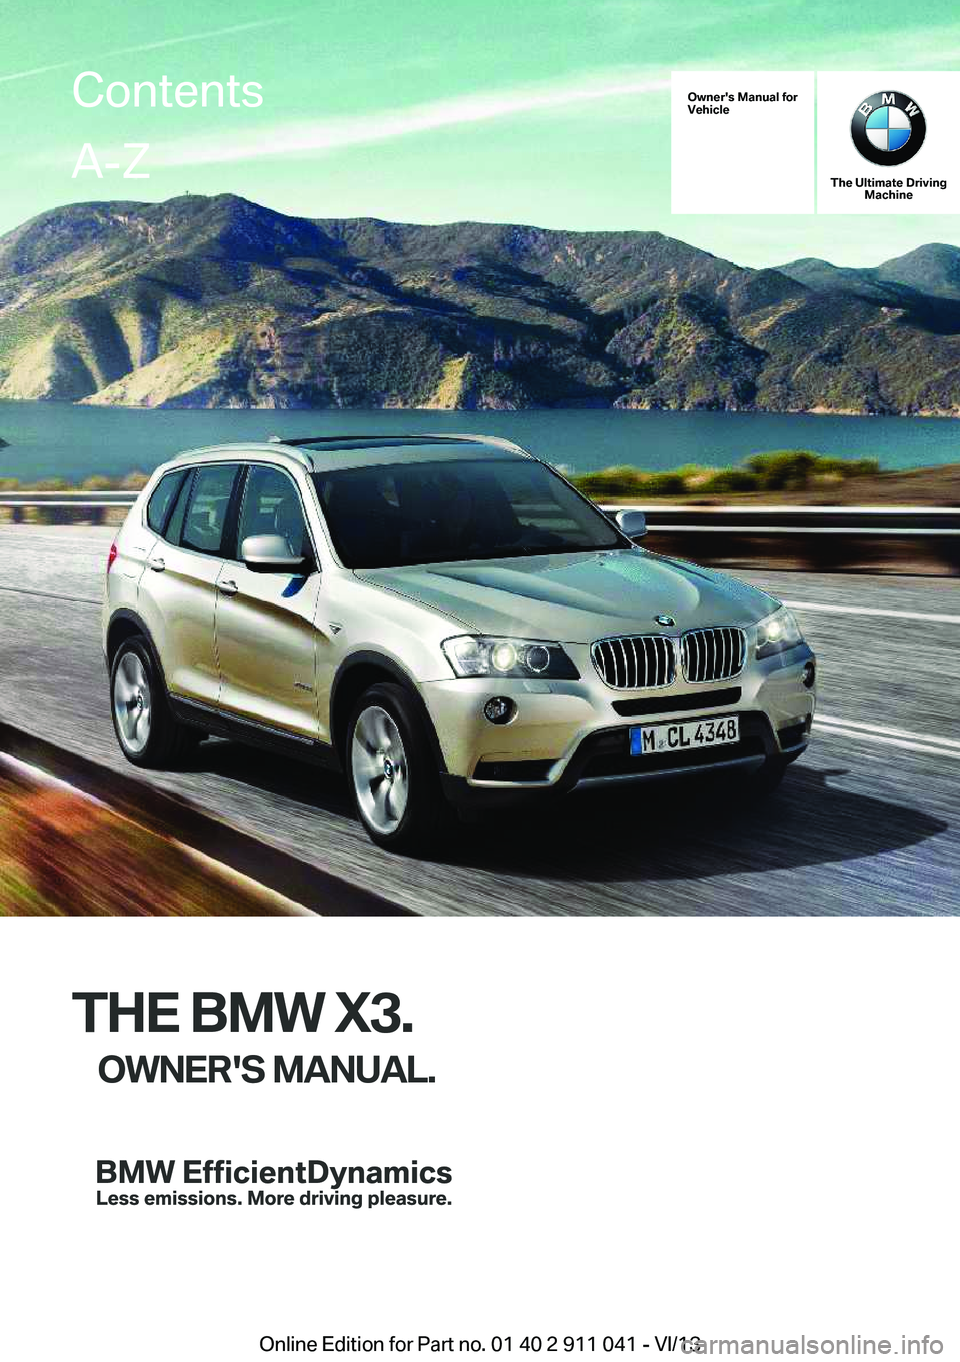 BMW X3 XDRIVE 35I 2014  Owners Manual Owner's Manual for
Vehicle
The Ultimate Driving Machine
THE BMW X3.
OWNER'S MANUAL.
ContentsA-Z
Online Edition for Part no. 01 40 2 911 041 - VI/13   